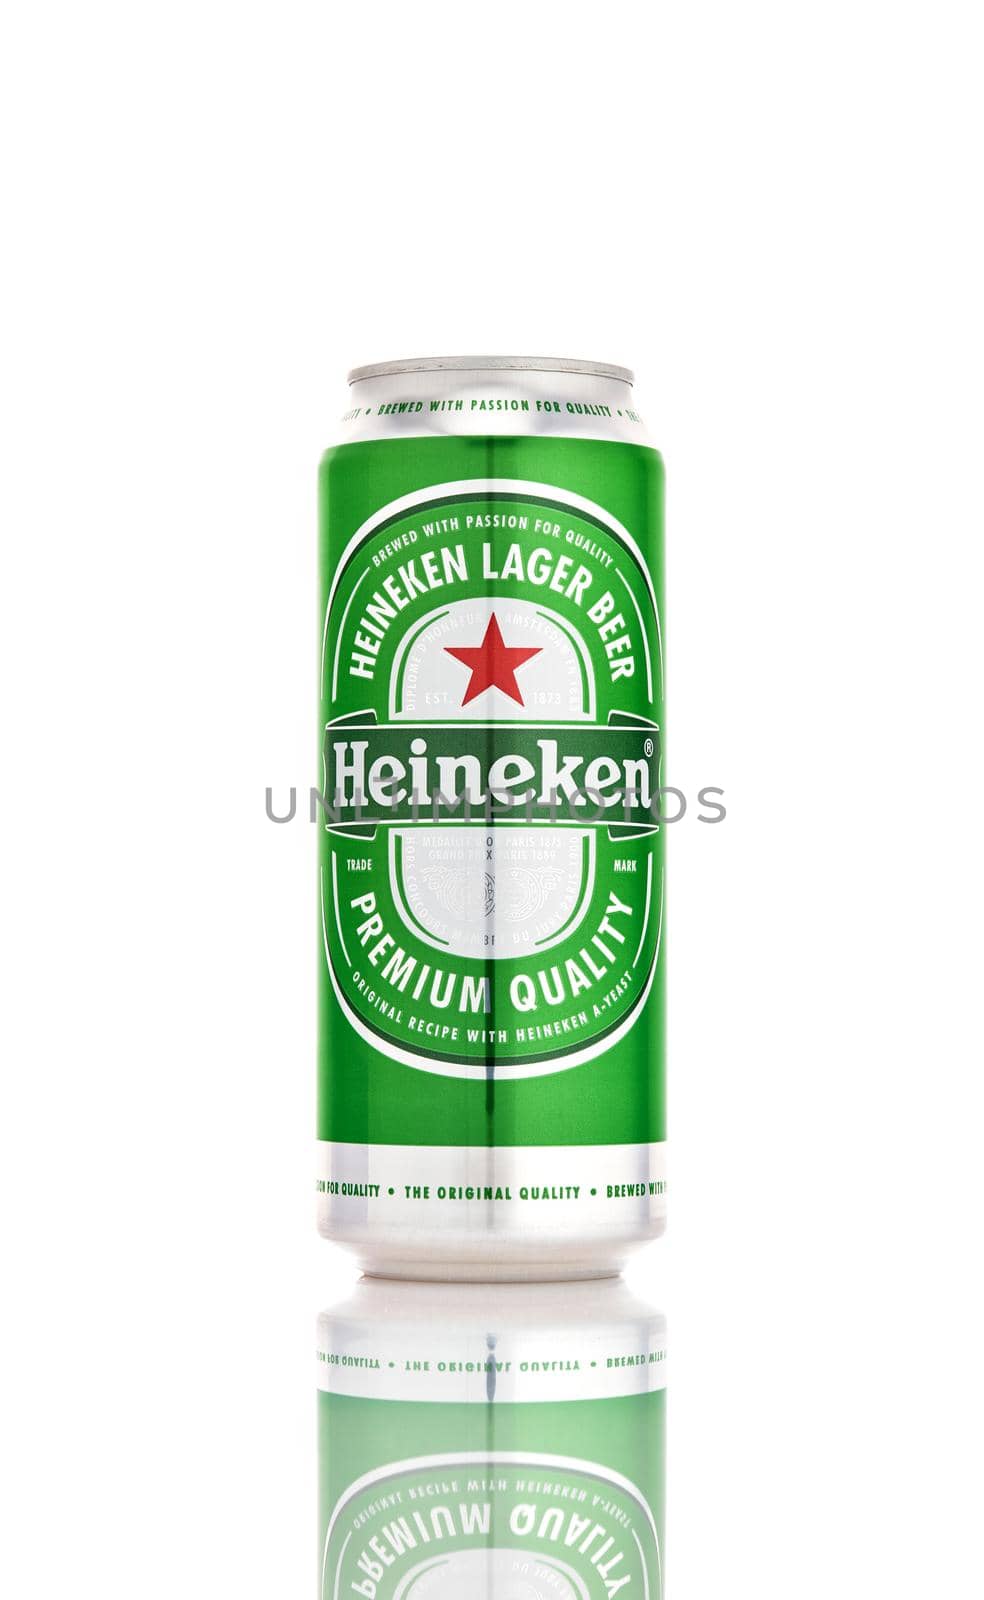 Heineken Beer can isolated on white background. Heineken Company is very popular in beer market in the USA 21.06.2019, Rostov-on-Don, Russia.